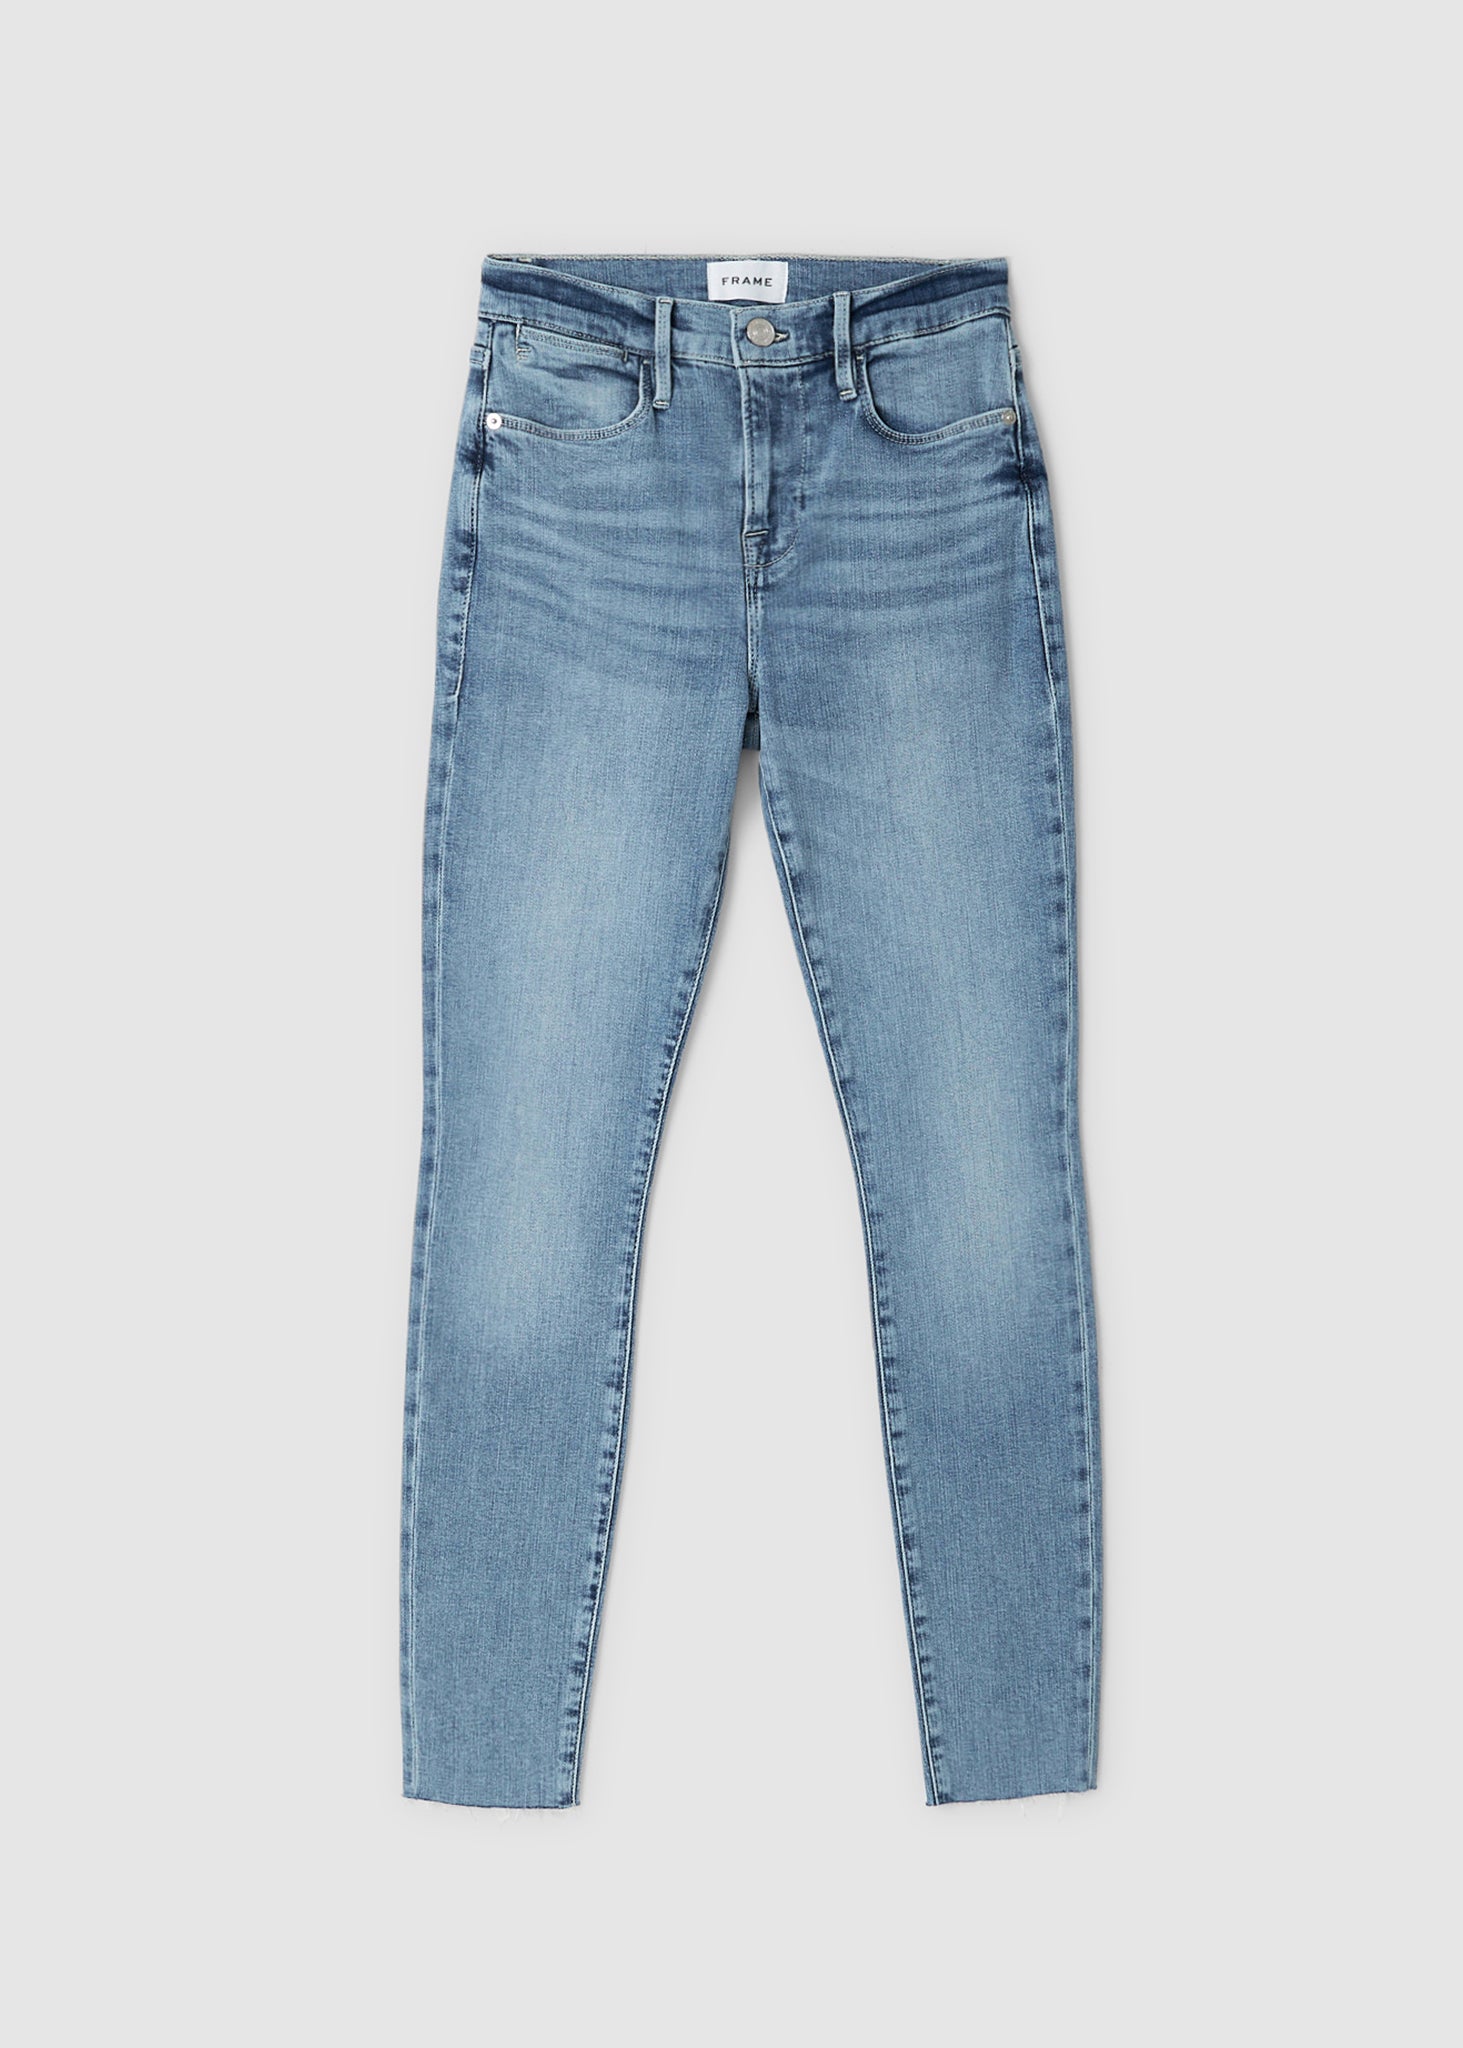 Frame Womens Le High Skinny Raw After Jeans